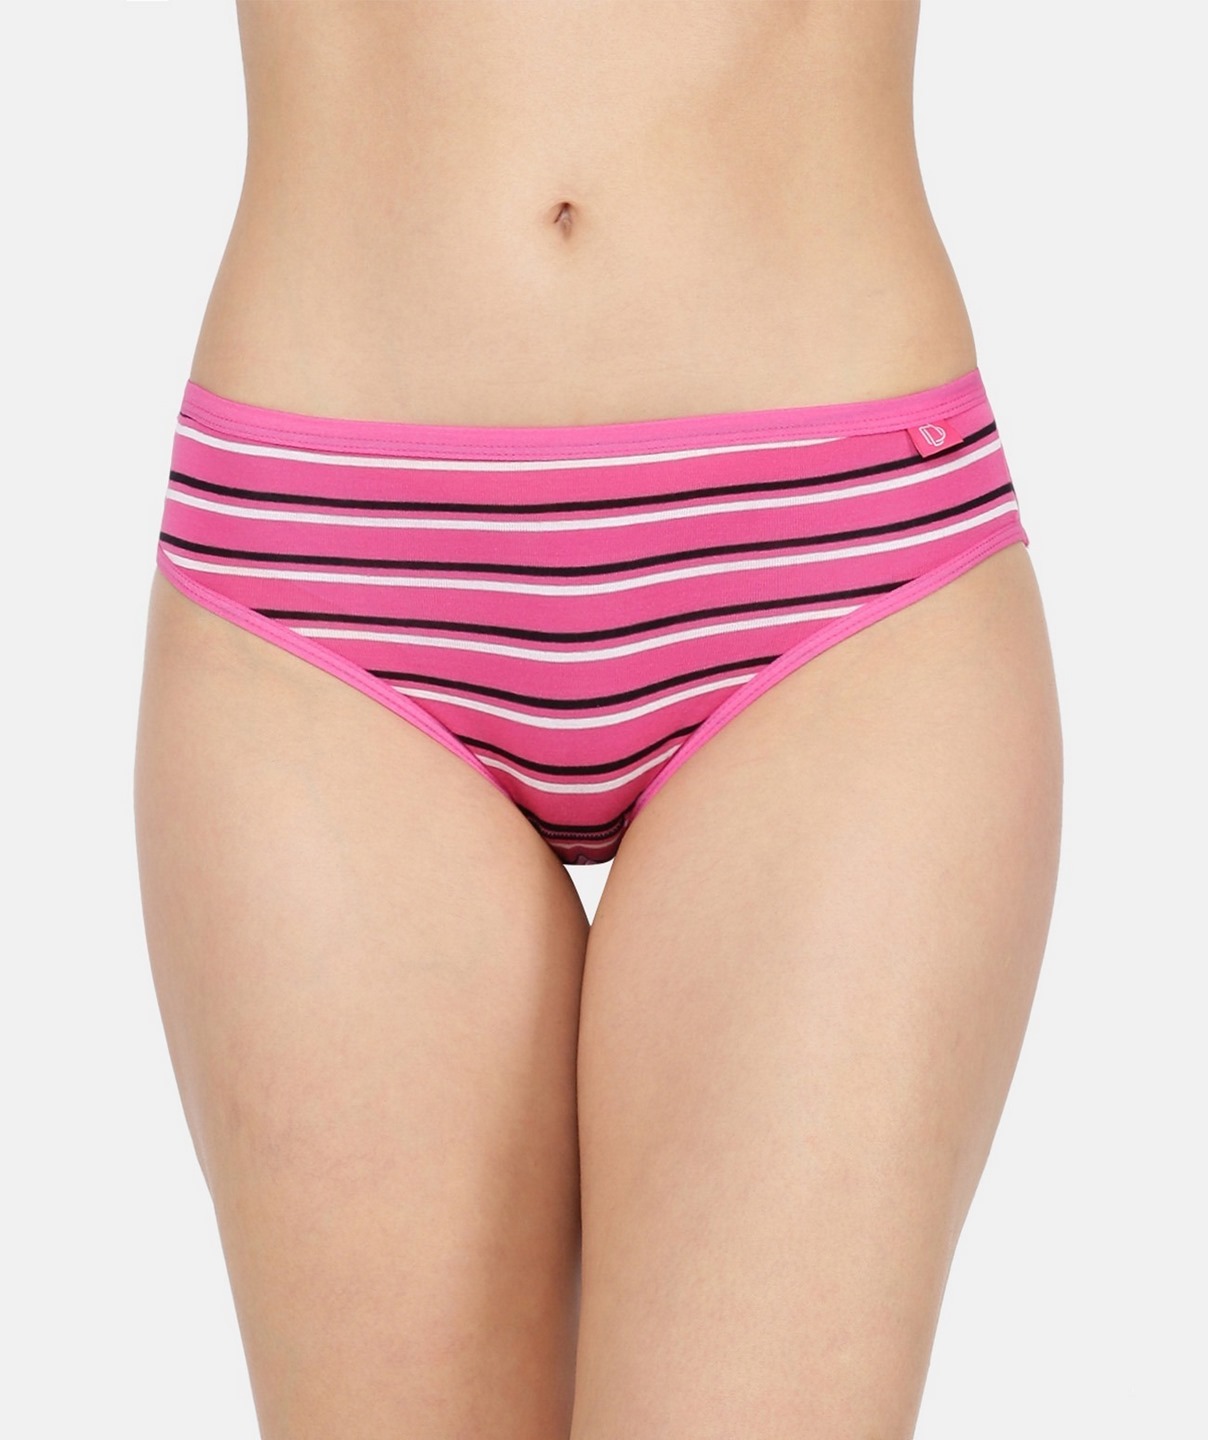 Dollar Missy Women Outer Elastic Stripes Assorted Pack of 2 Lycra